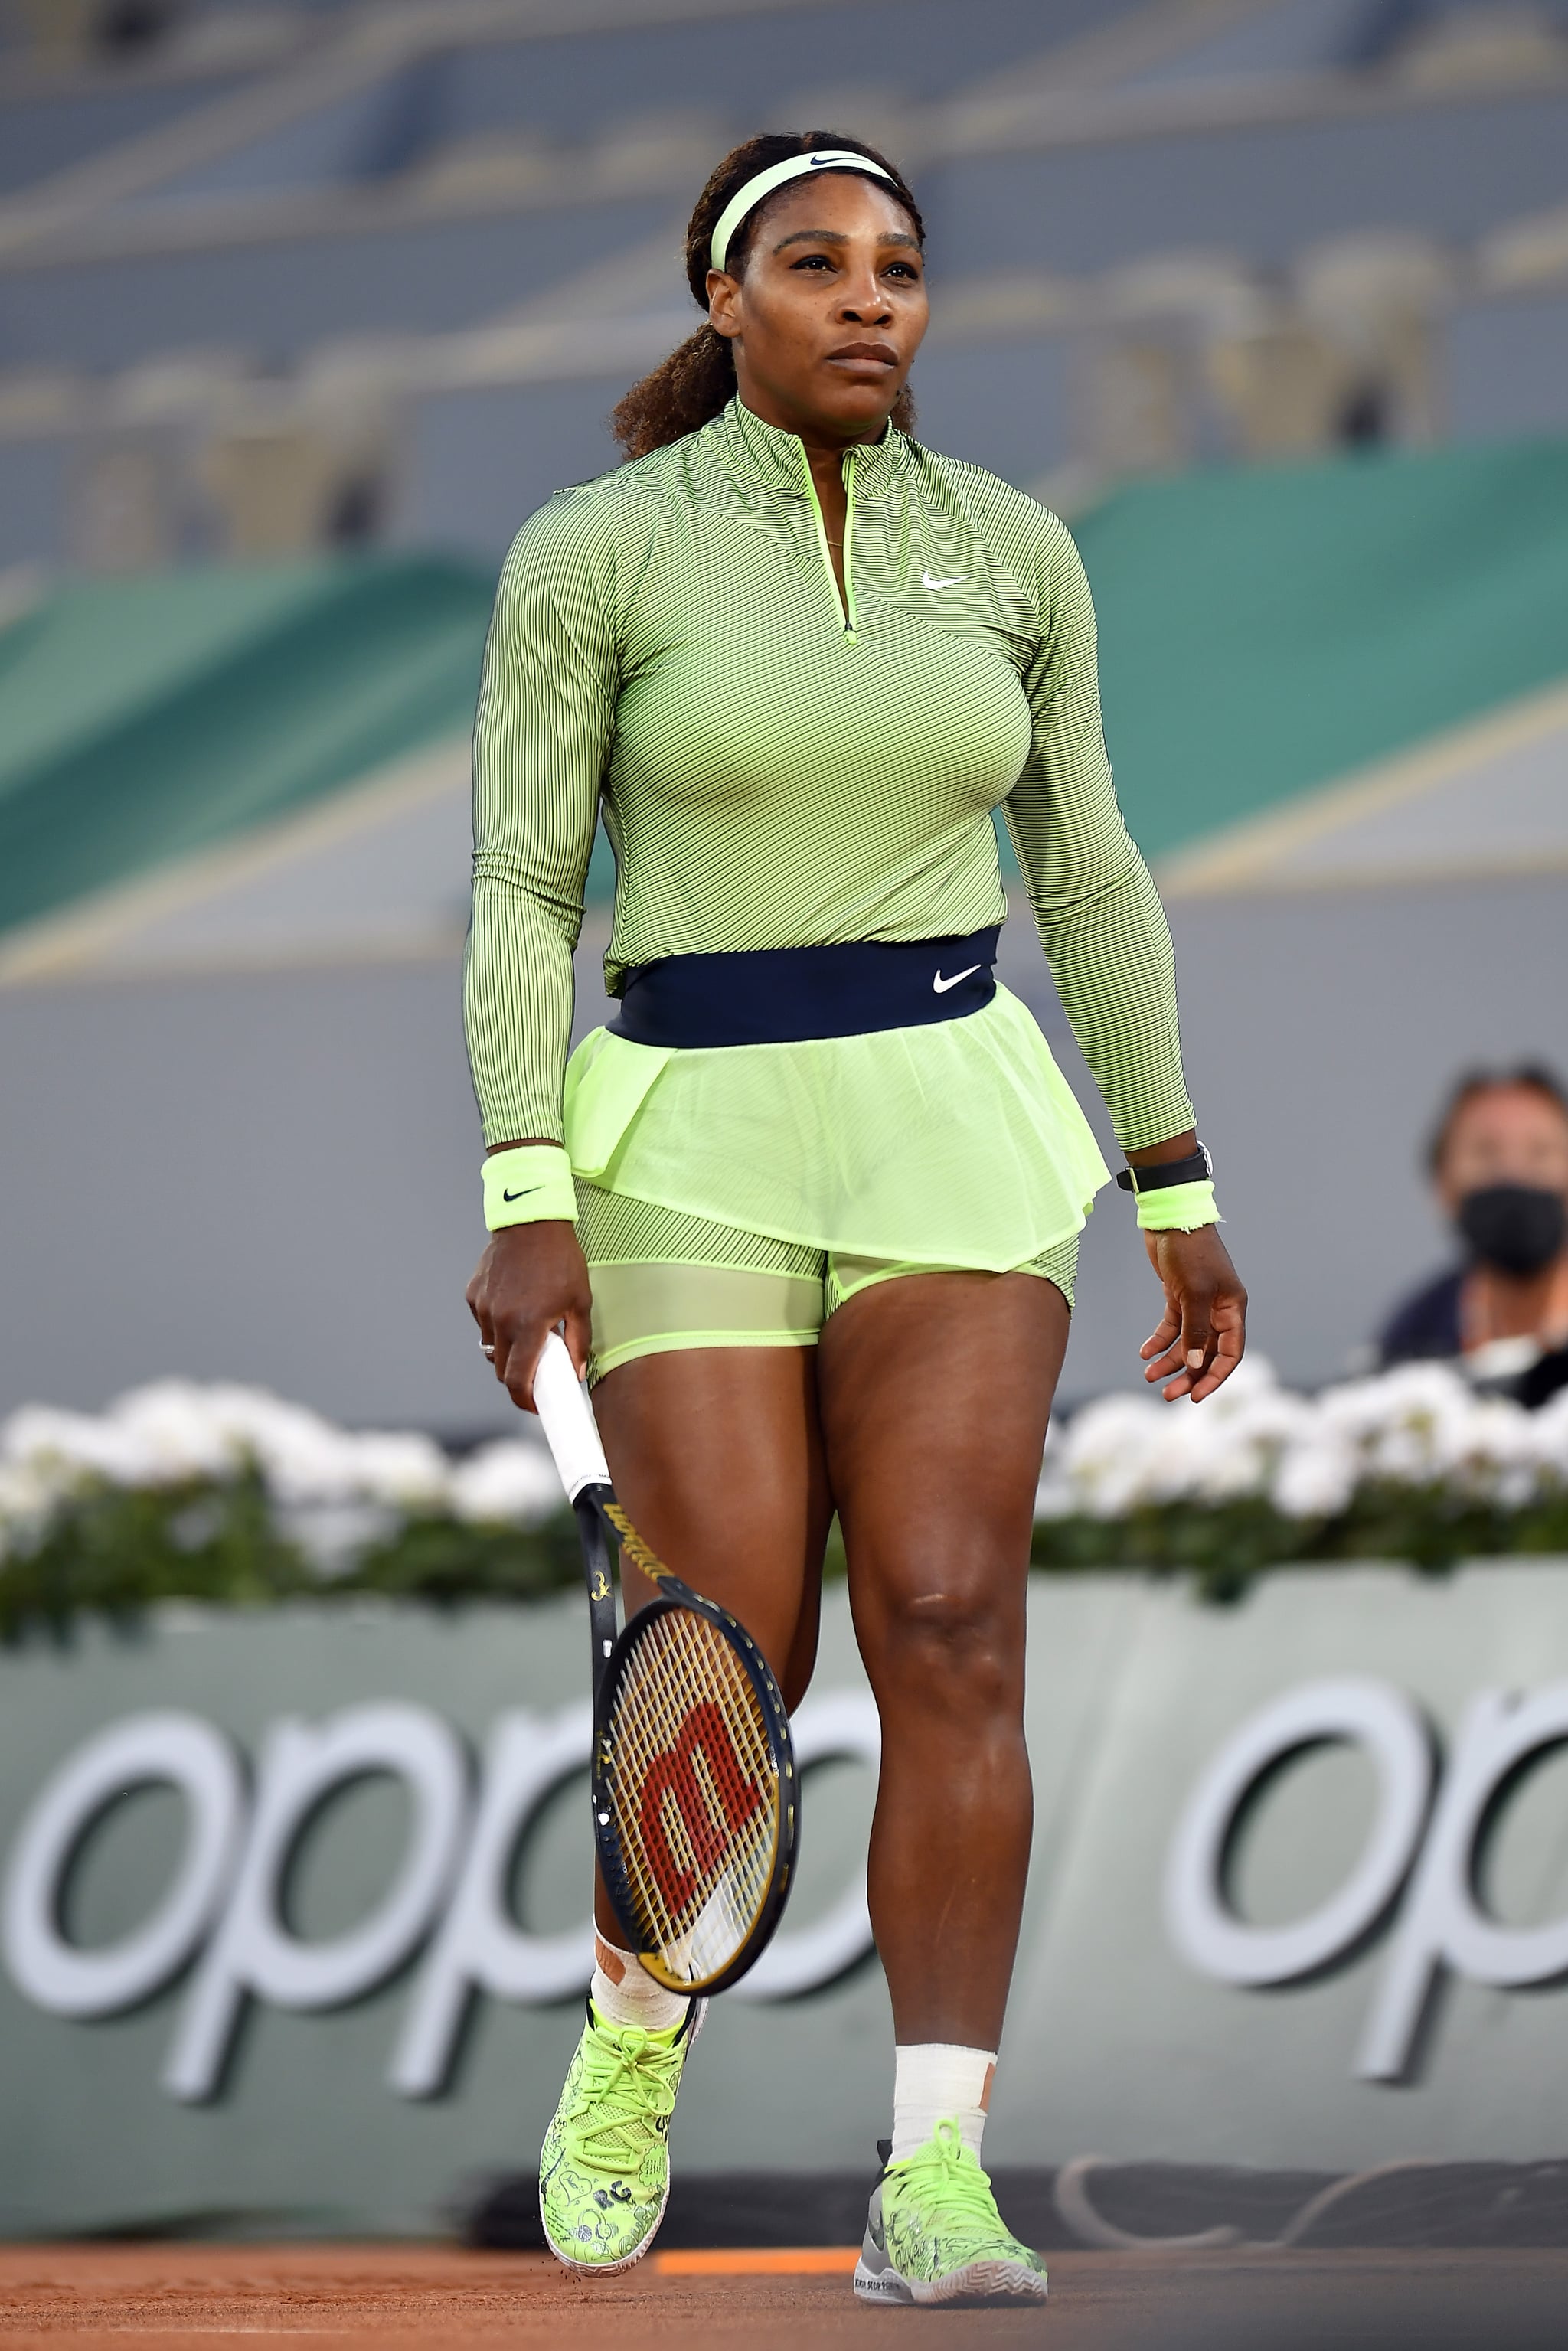 Fitness, Health & Well-Being | Serena Williams Sends a Powerful Message With Custom Highlighter-Green Open Sneakers | POPSUGAR Fitness Photo 9